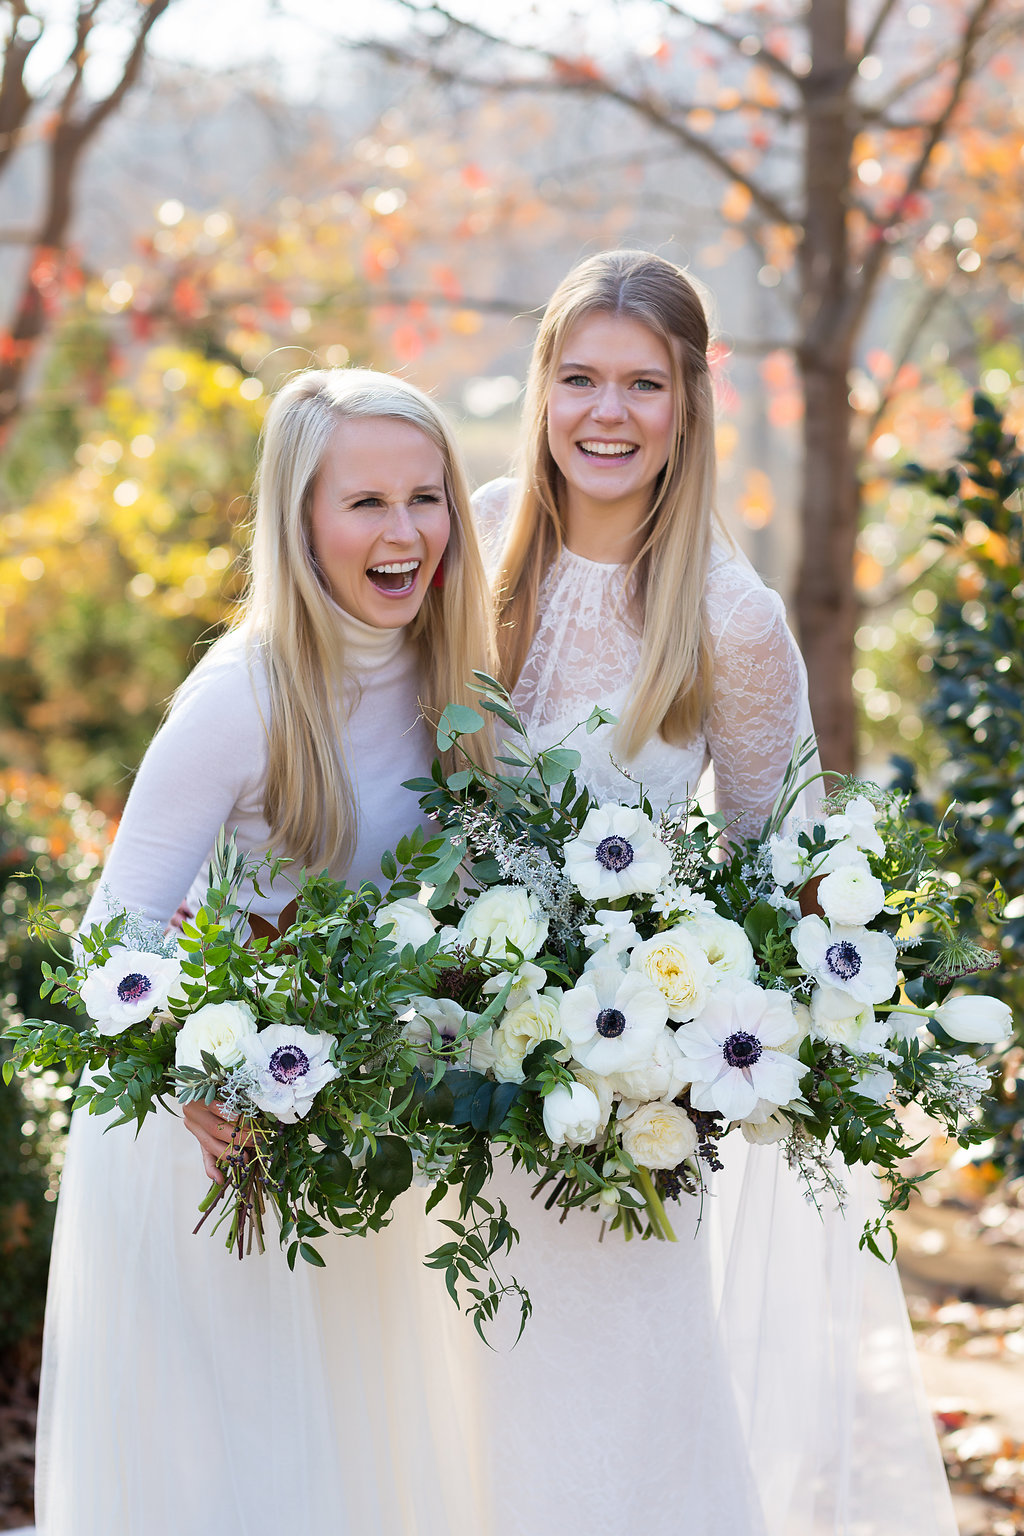 Winter Wedding at Blackberry Farm with all white and greenery florals // Southern Floral Design